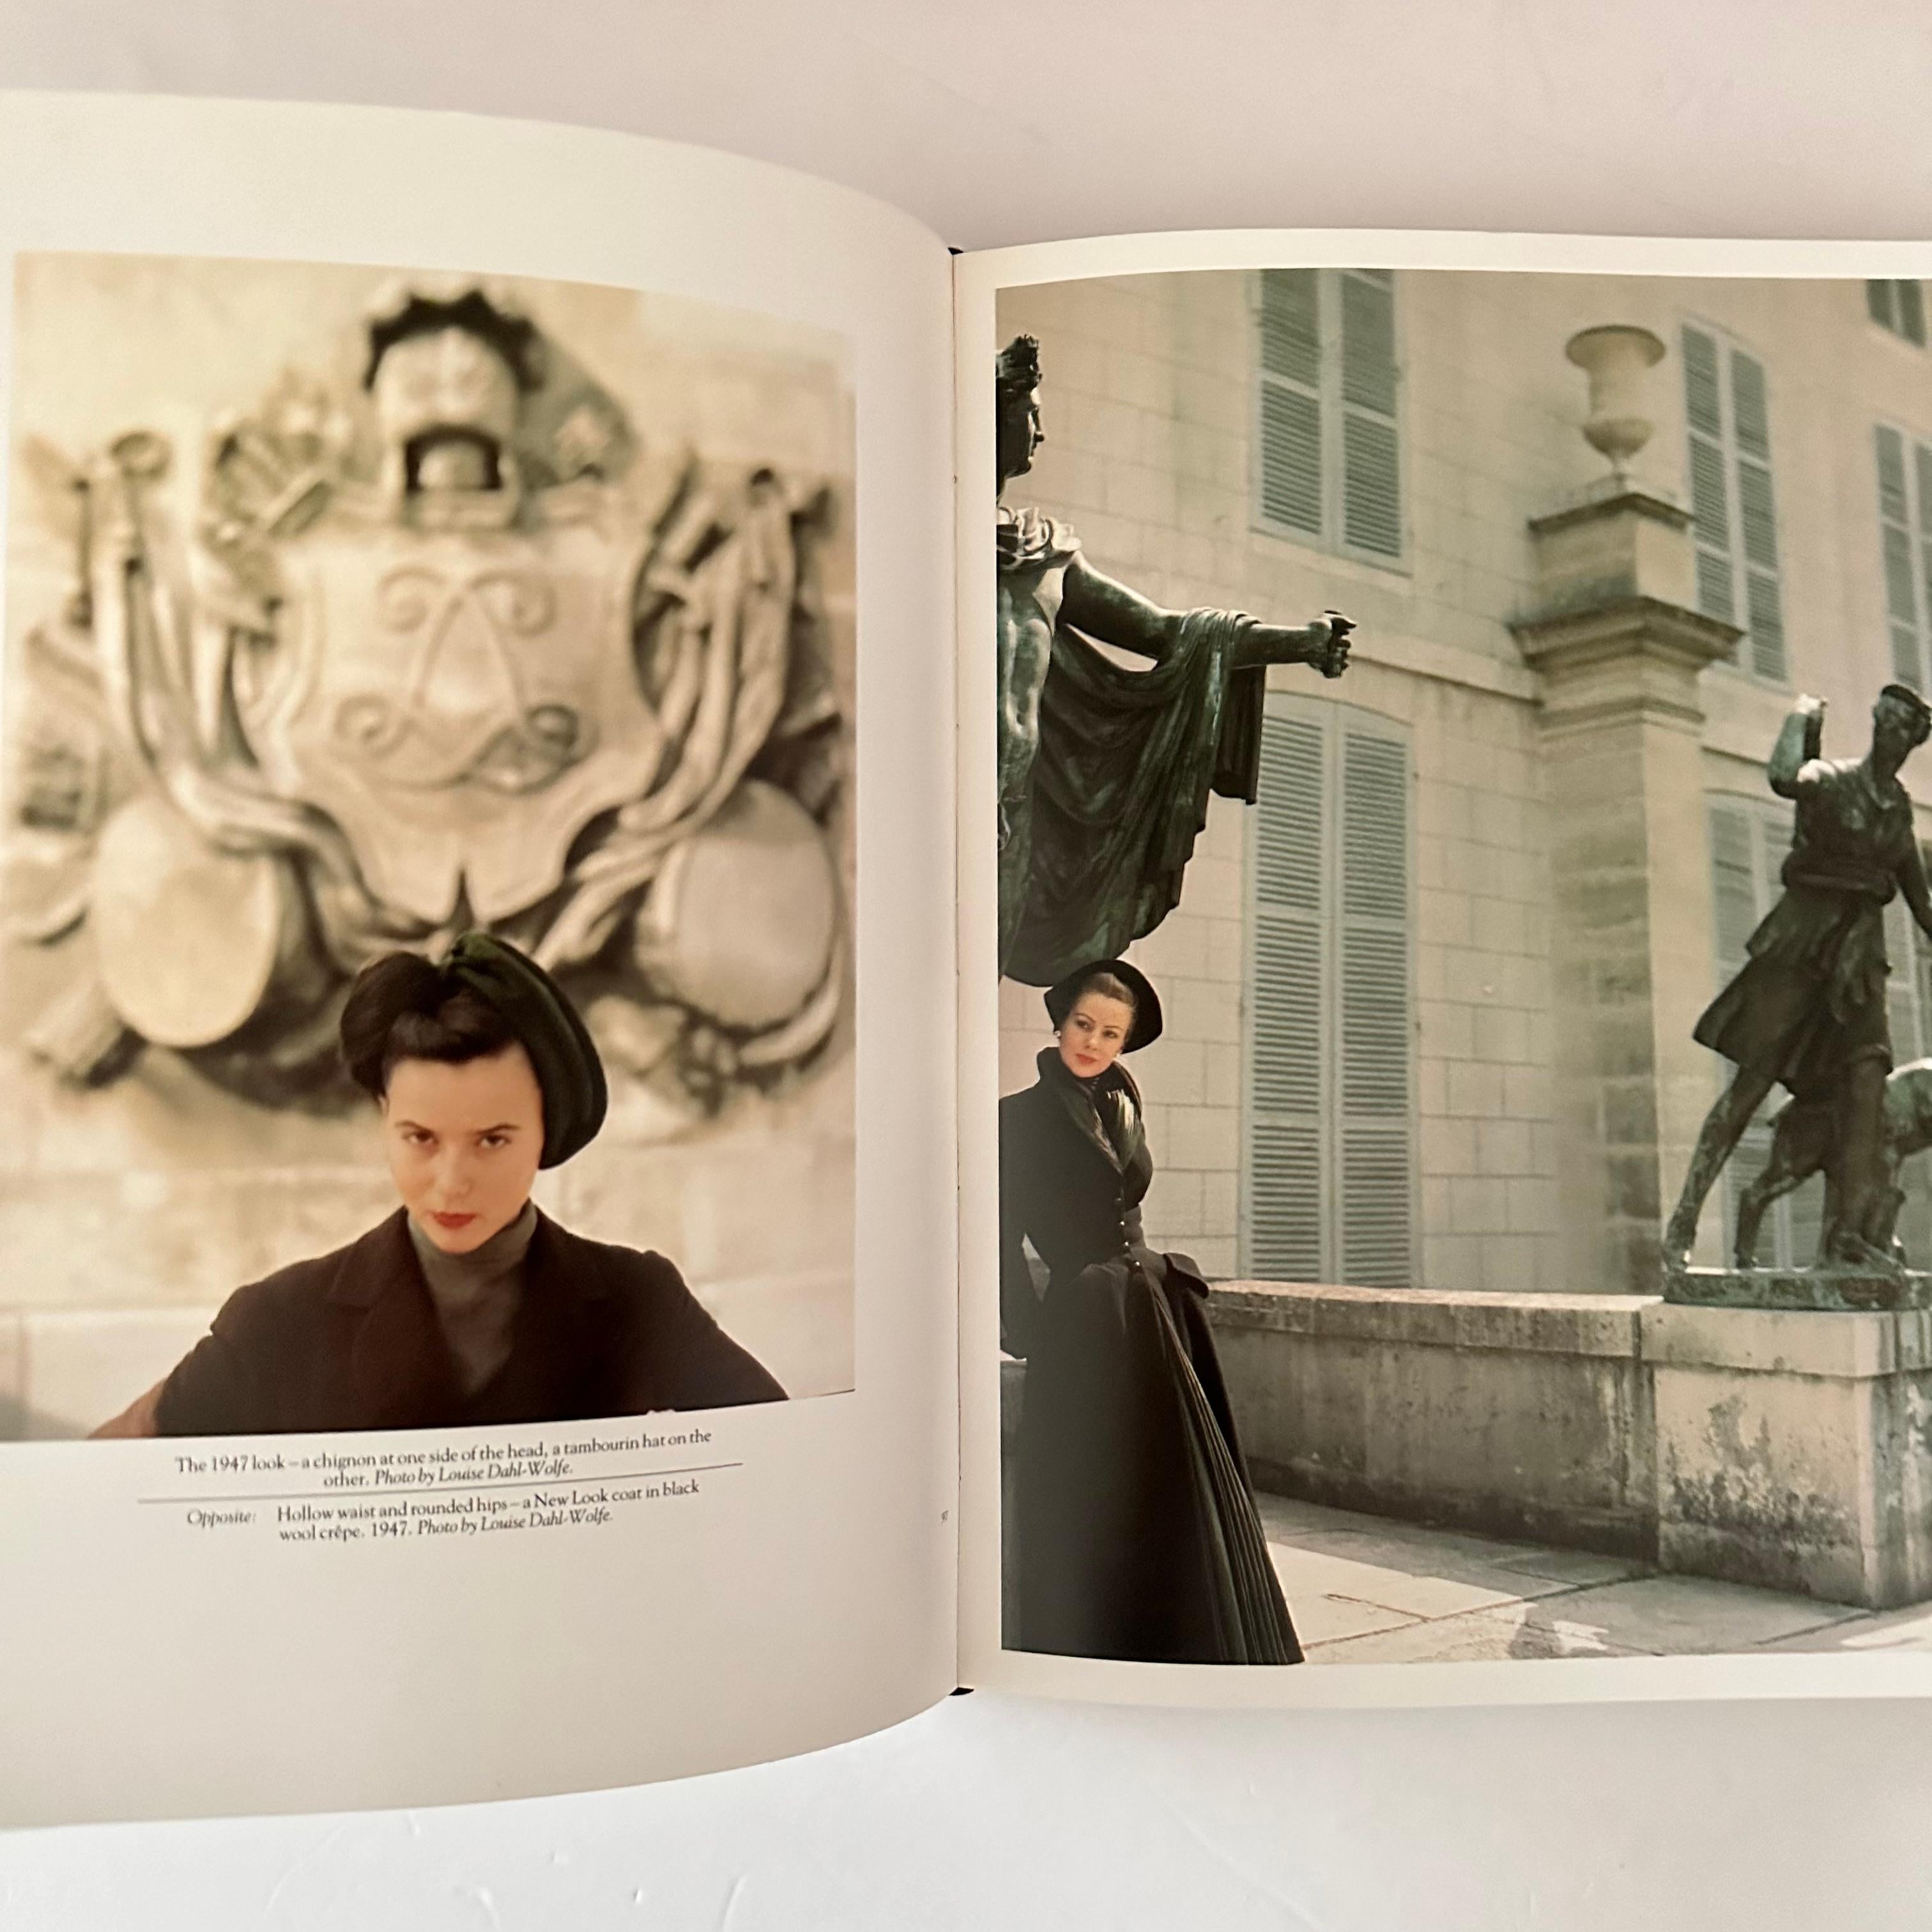 Published by Rizzoli, 1st U. S. edition, New York, 1987. Hardback with English text, translated from the original French text.

Monsieur Dior’s ‘New Look’, emerged out of the gloom and austerity of the Second World War,  brought a breath of fresh